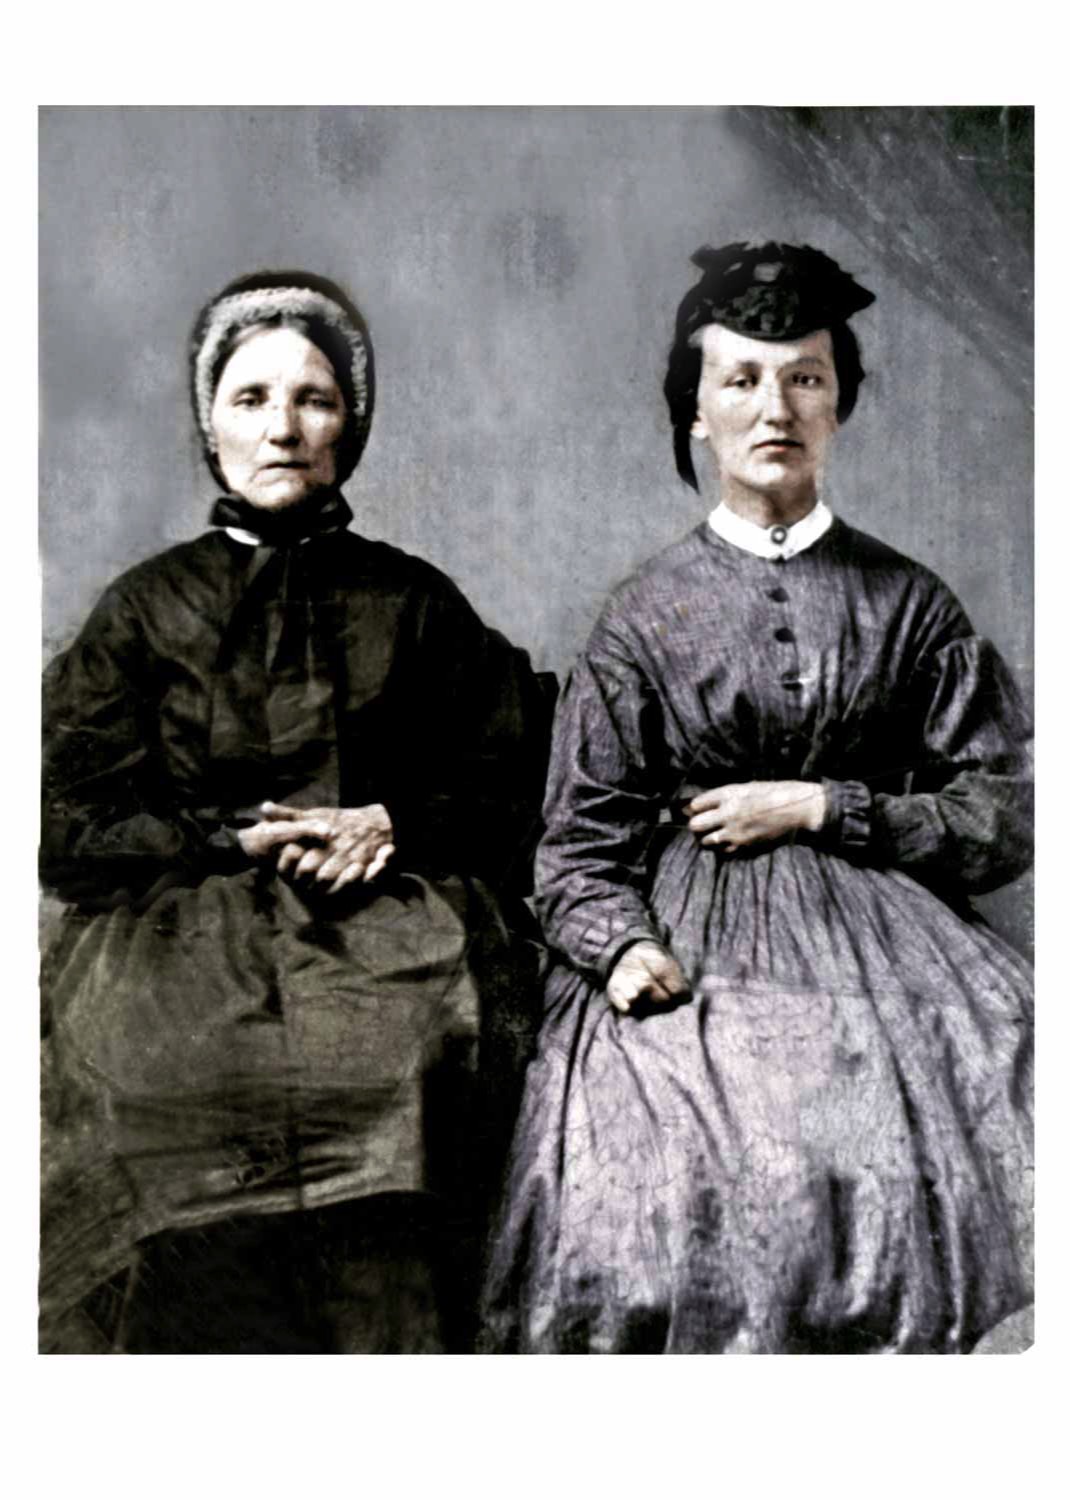 19th c. photo image repaired and colored